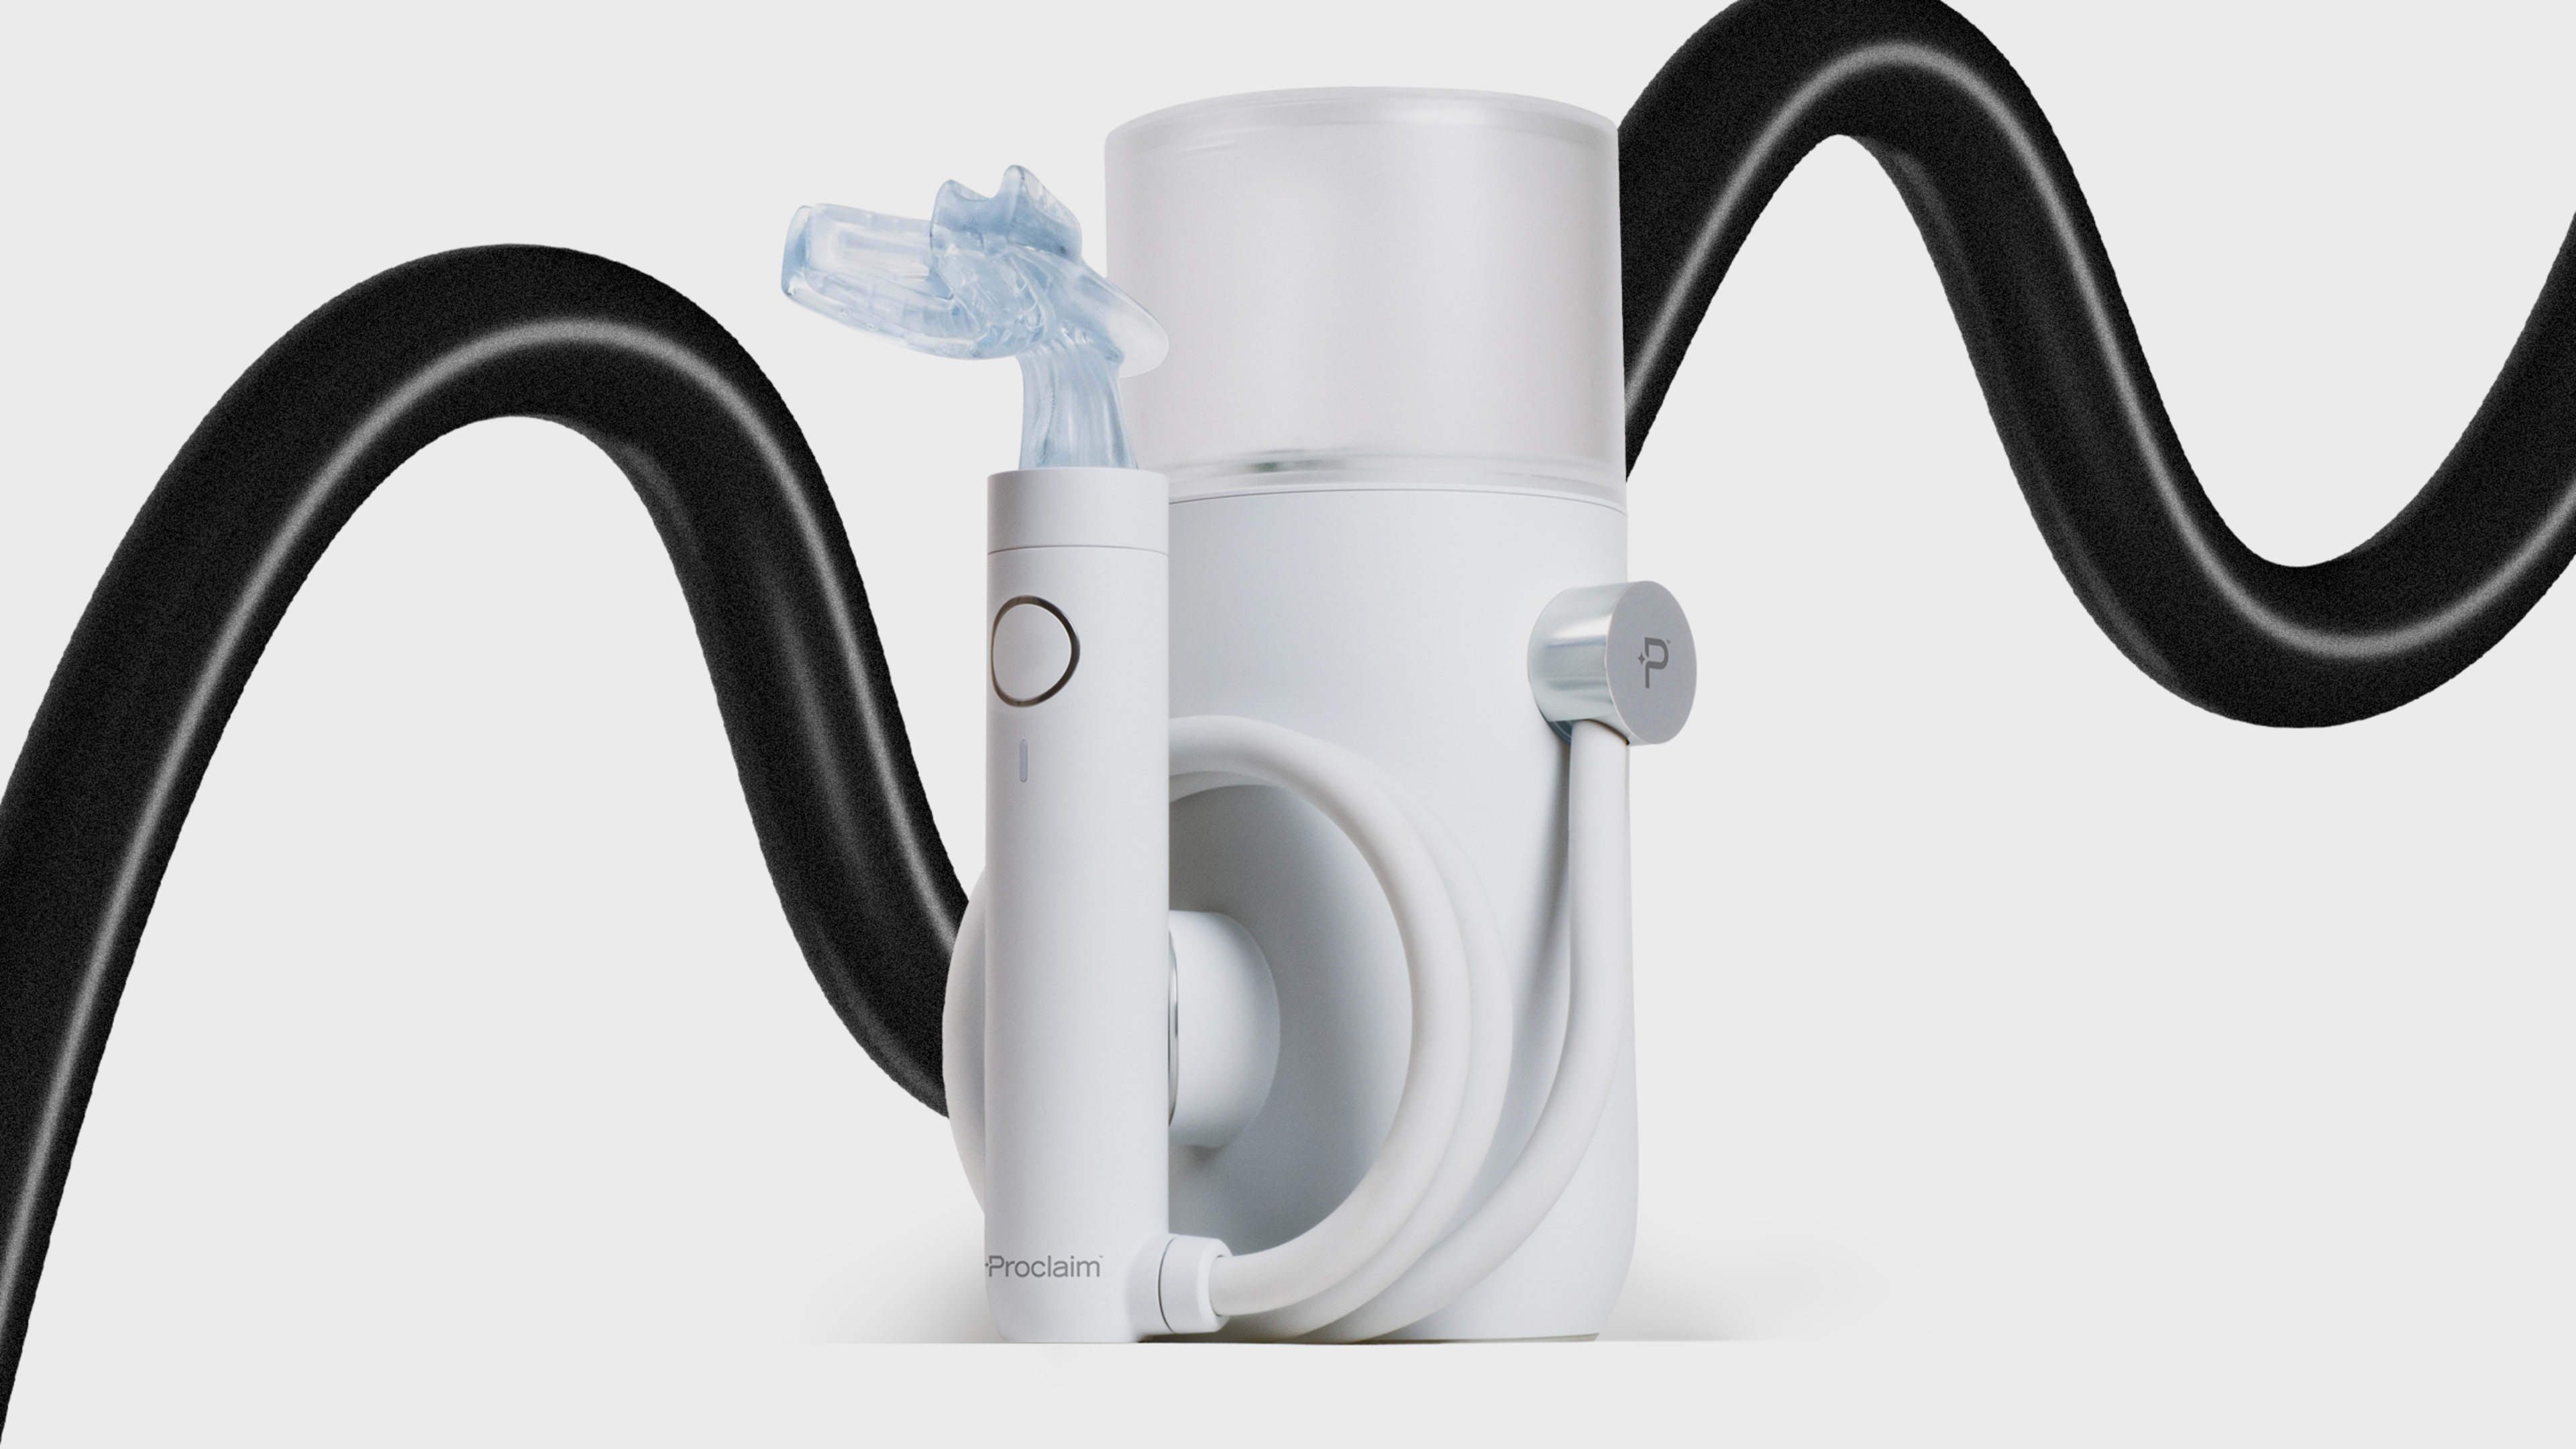 This $899 device could help you ditch flossing forever